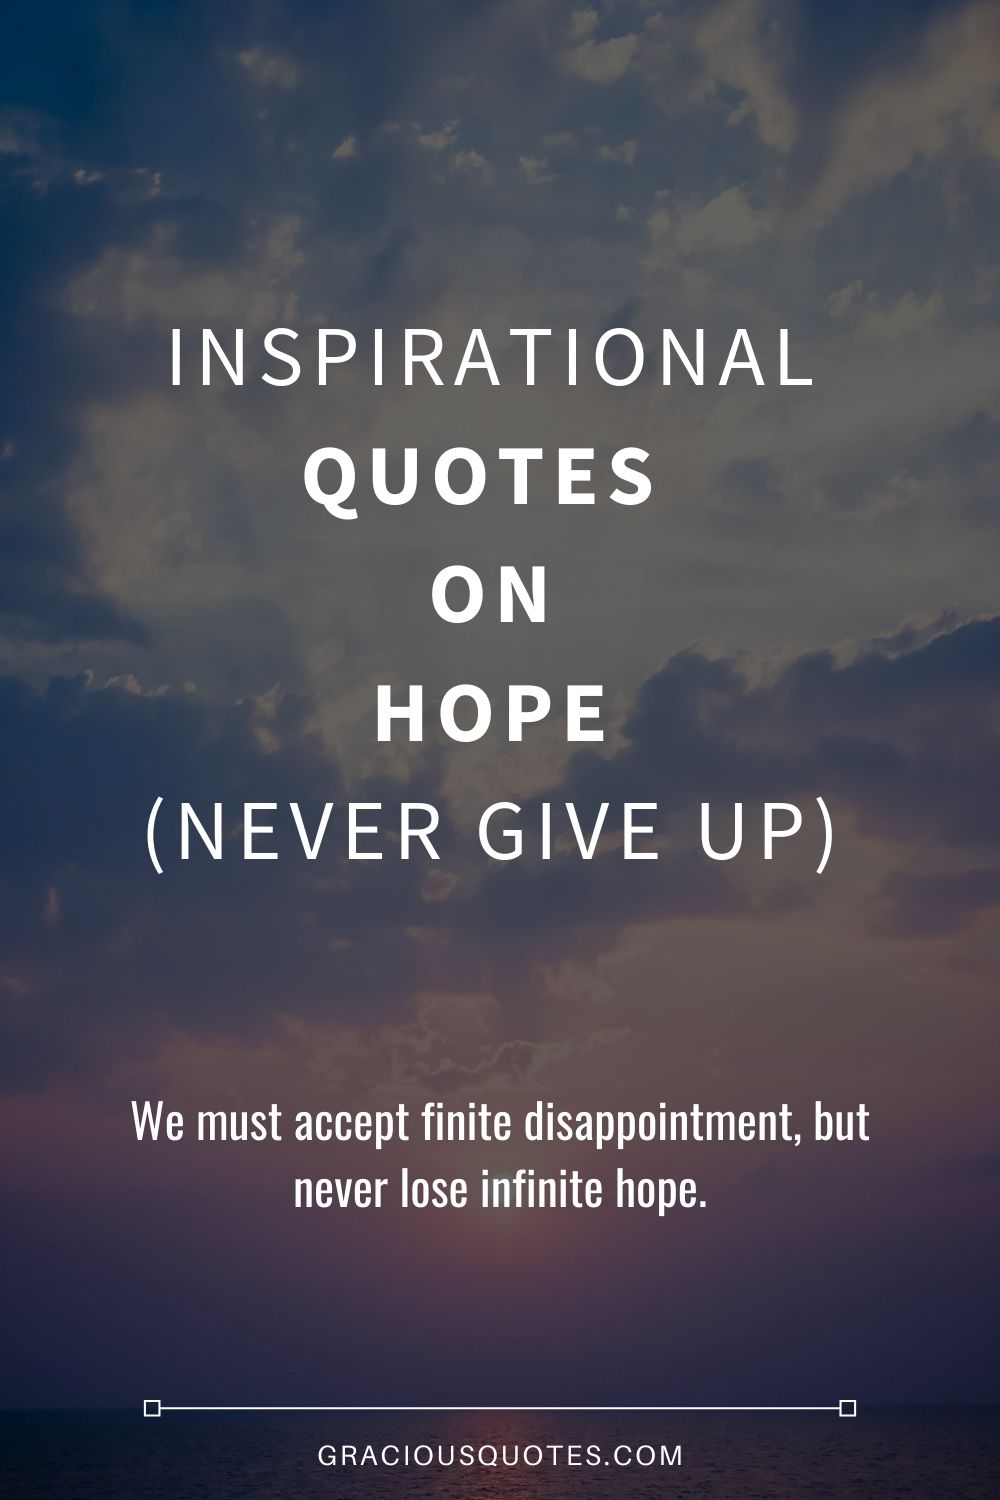 Inspirational Quotes on Hope (NEVER GIVE UP) - Gracious Quotes